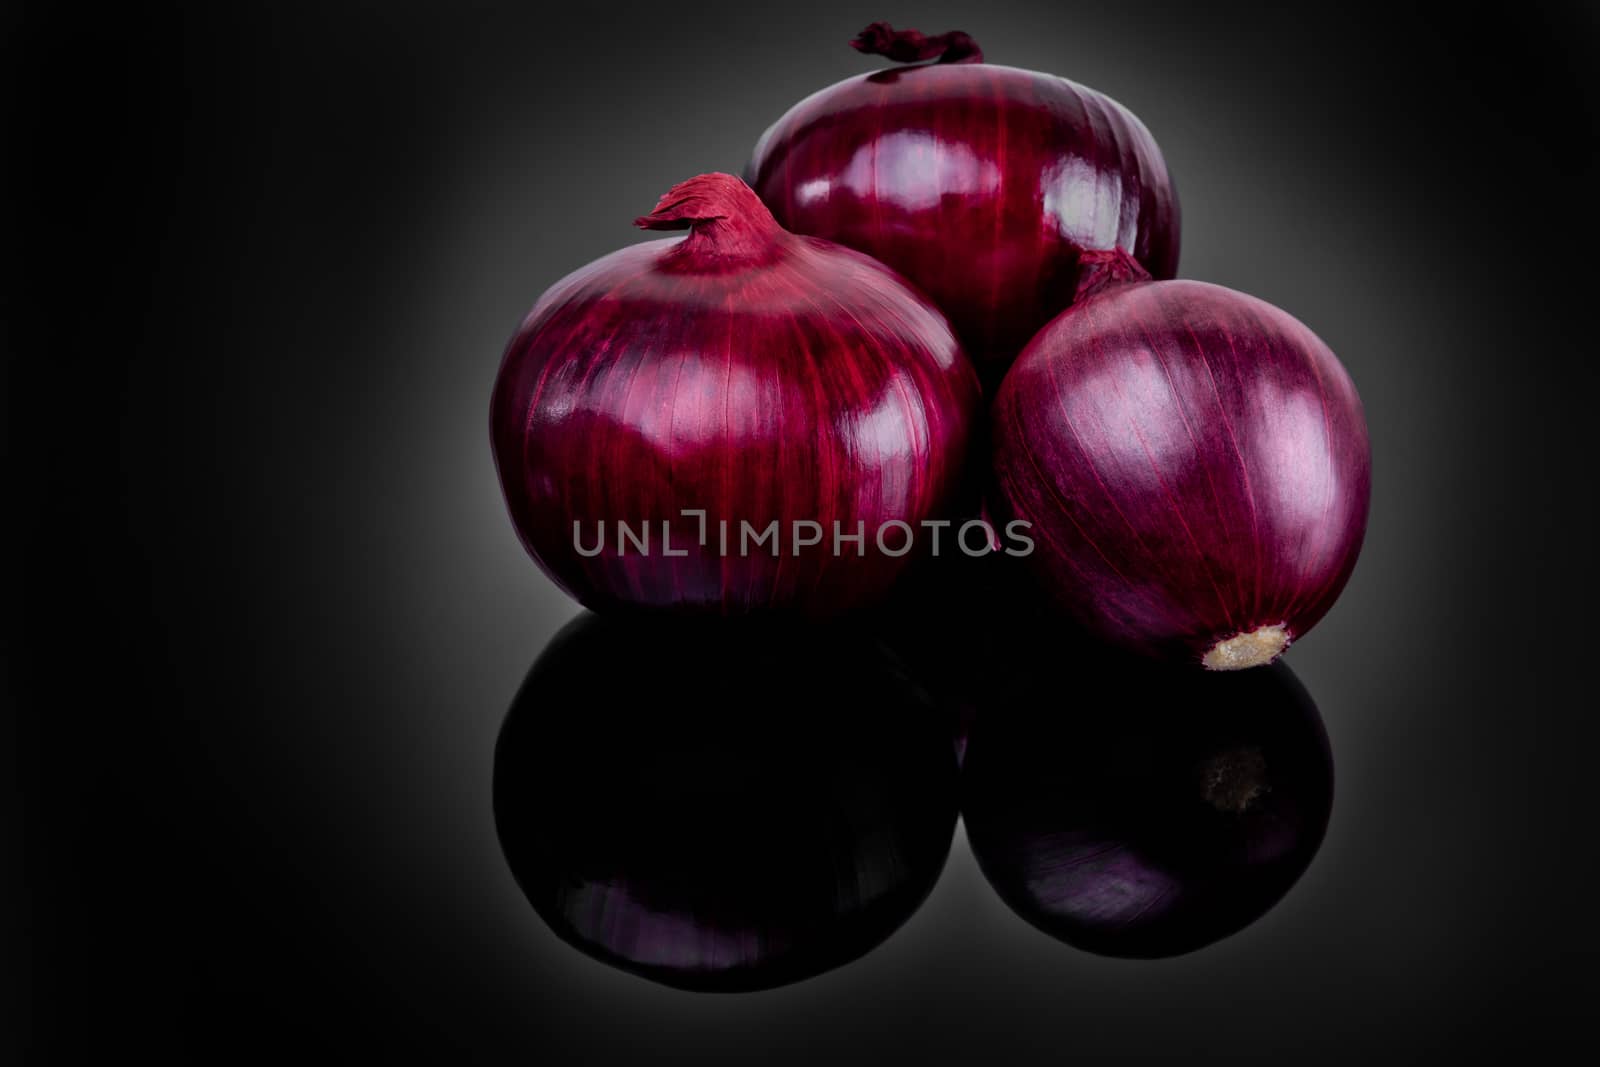 Shallots on black background with reflect onion bulb.